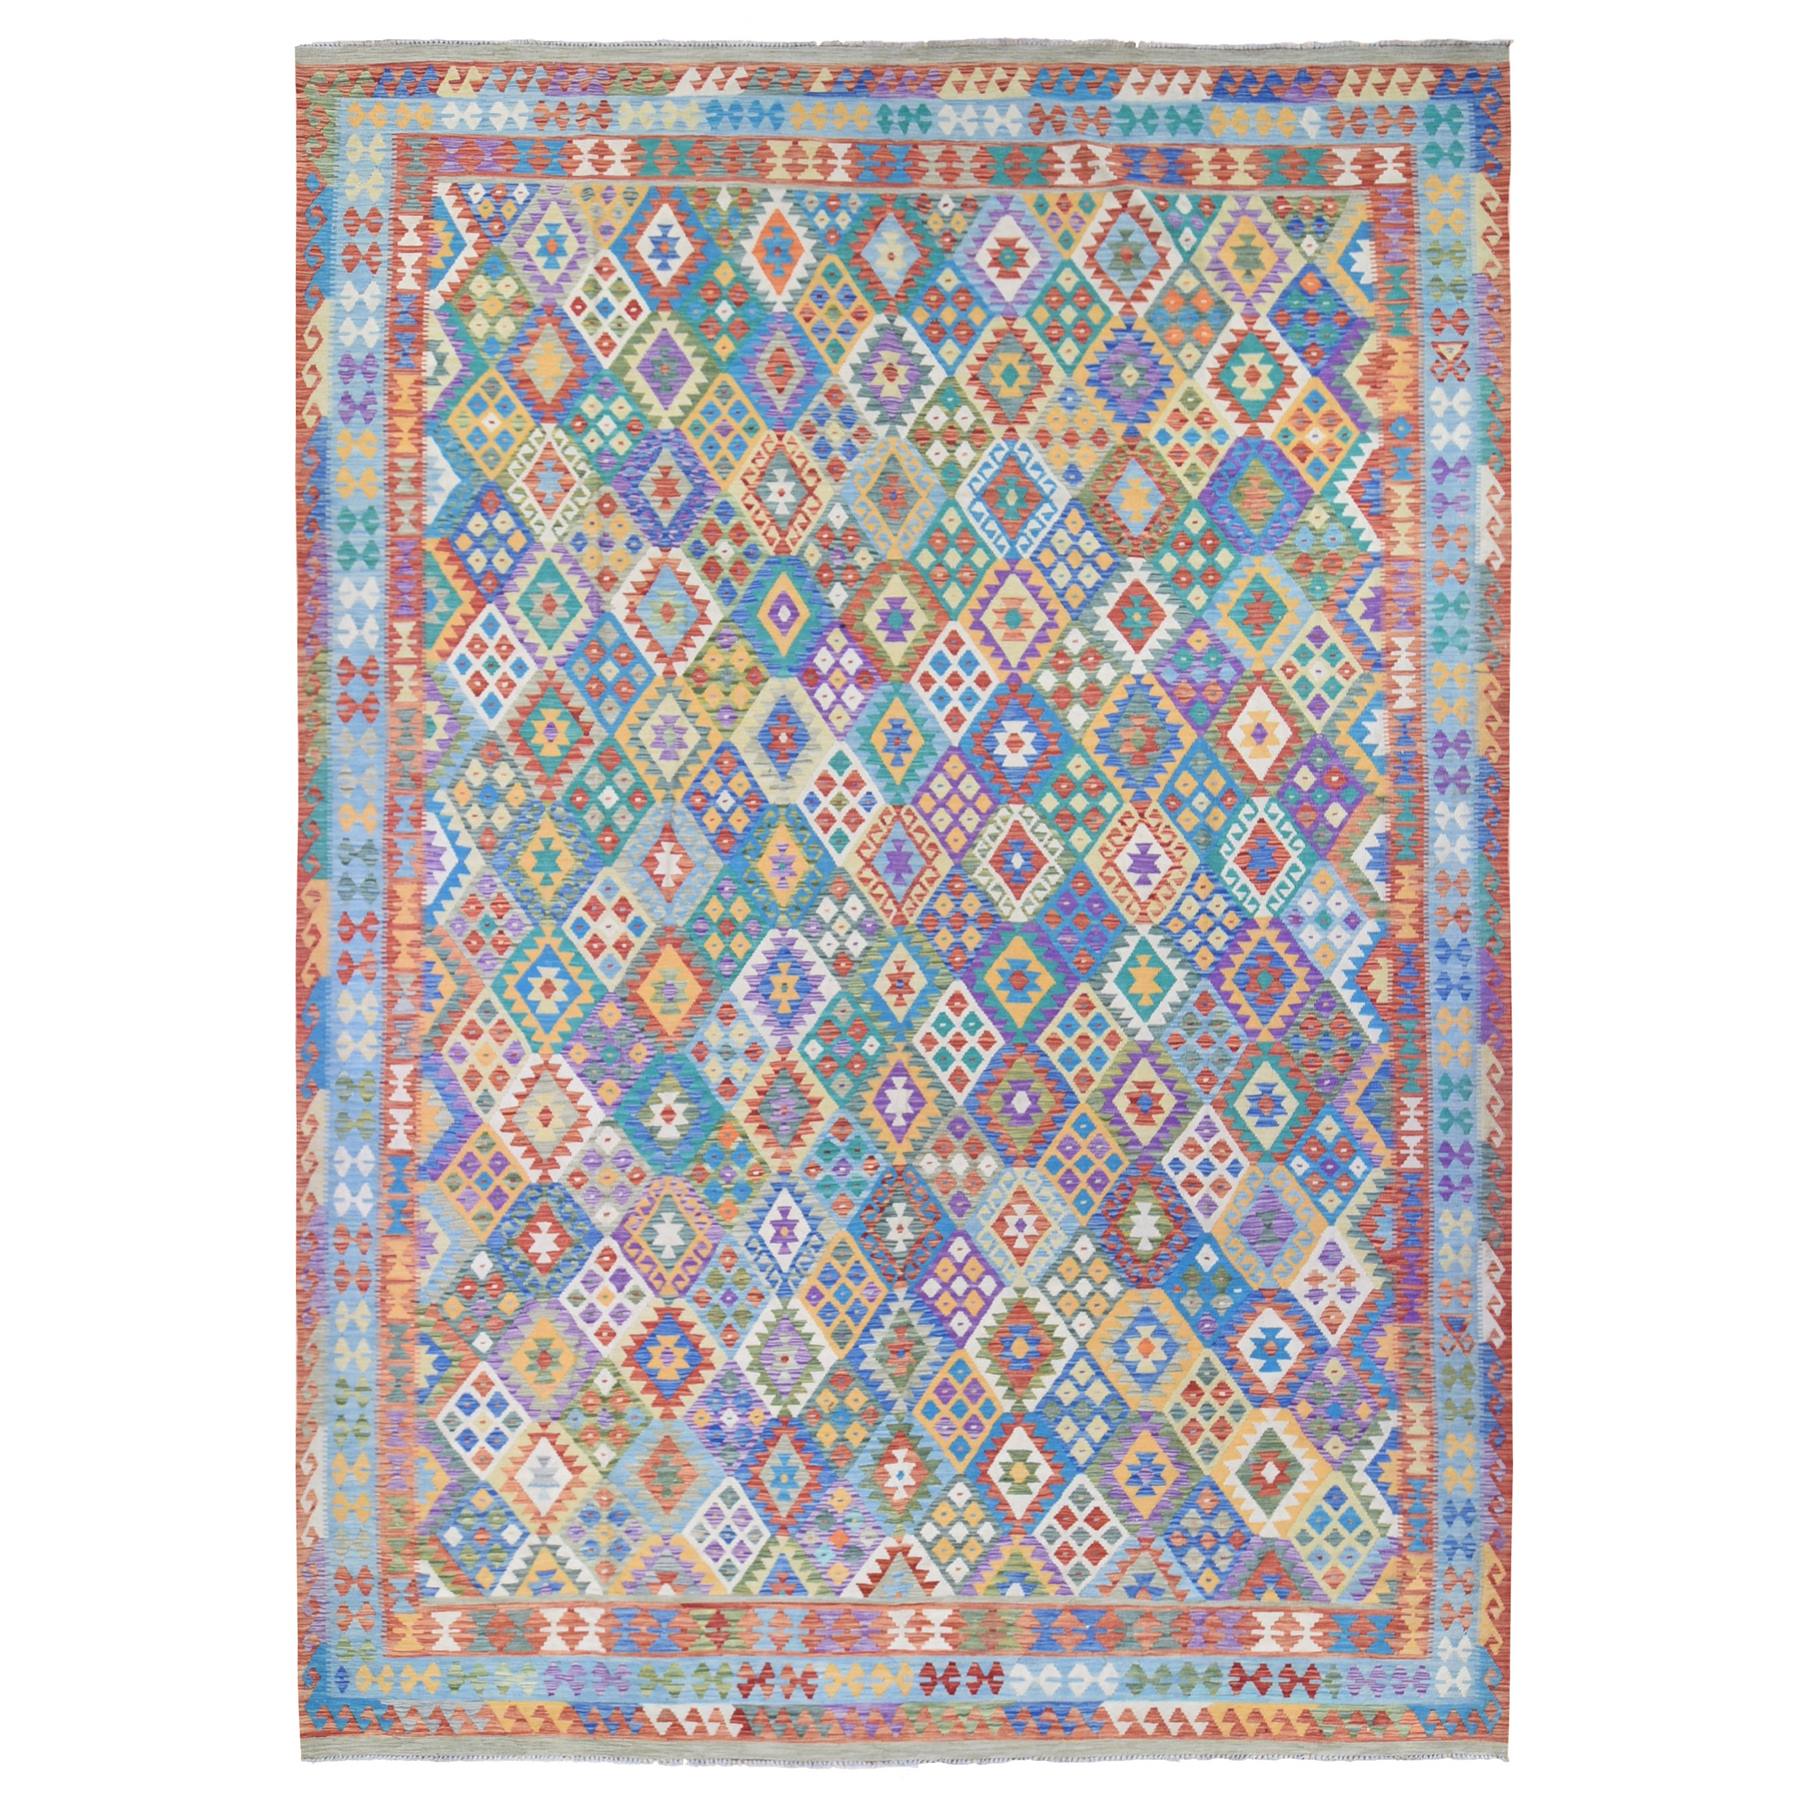 11'1"x16'5" Sunrise Colors, Afghan Kilim with Geometric Design, Flat Weave Vegetable Dyes Multicolored Pure Wool Hand Woven, Oversized Oriental Rug 